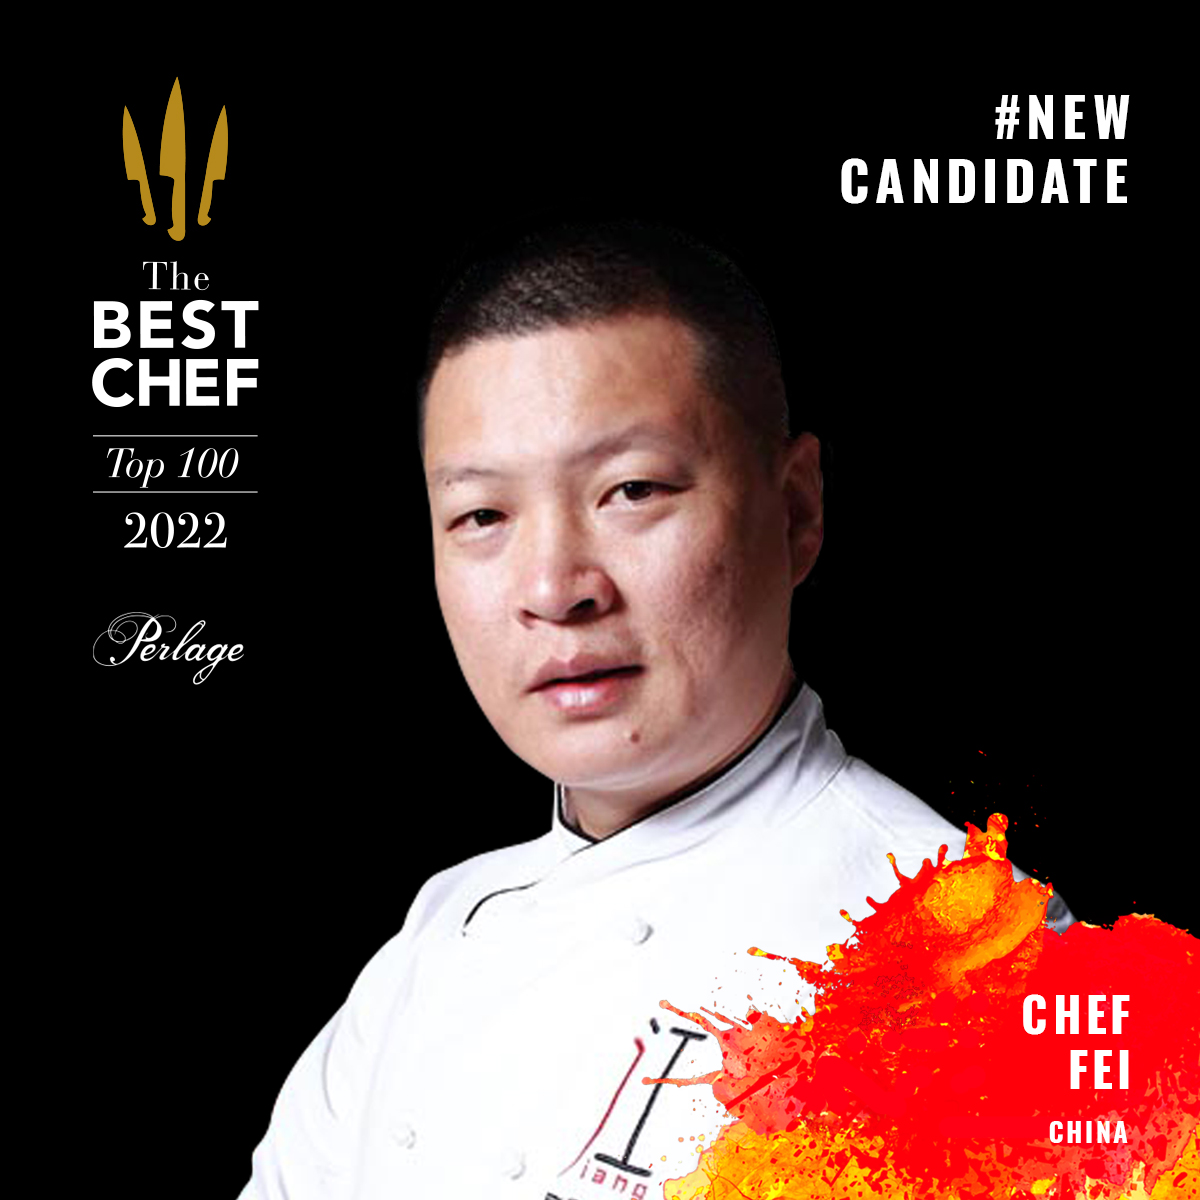 New-candidates-chef-fei